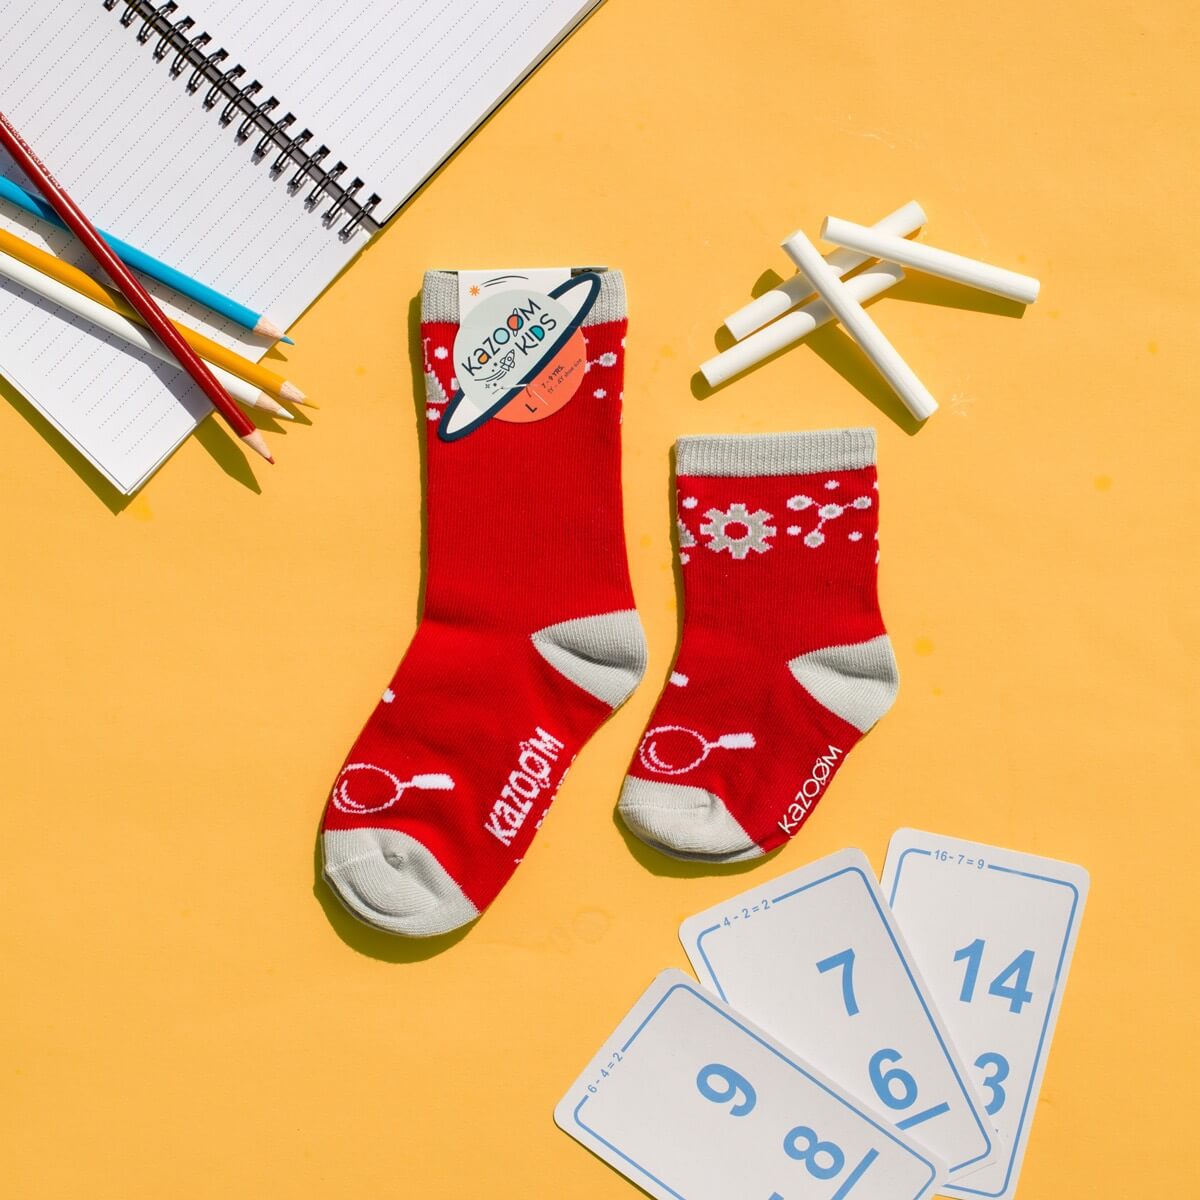 Toddler Socks with Grips - Red and White Science Lab Socks